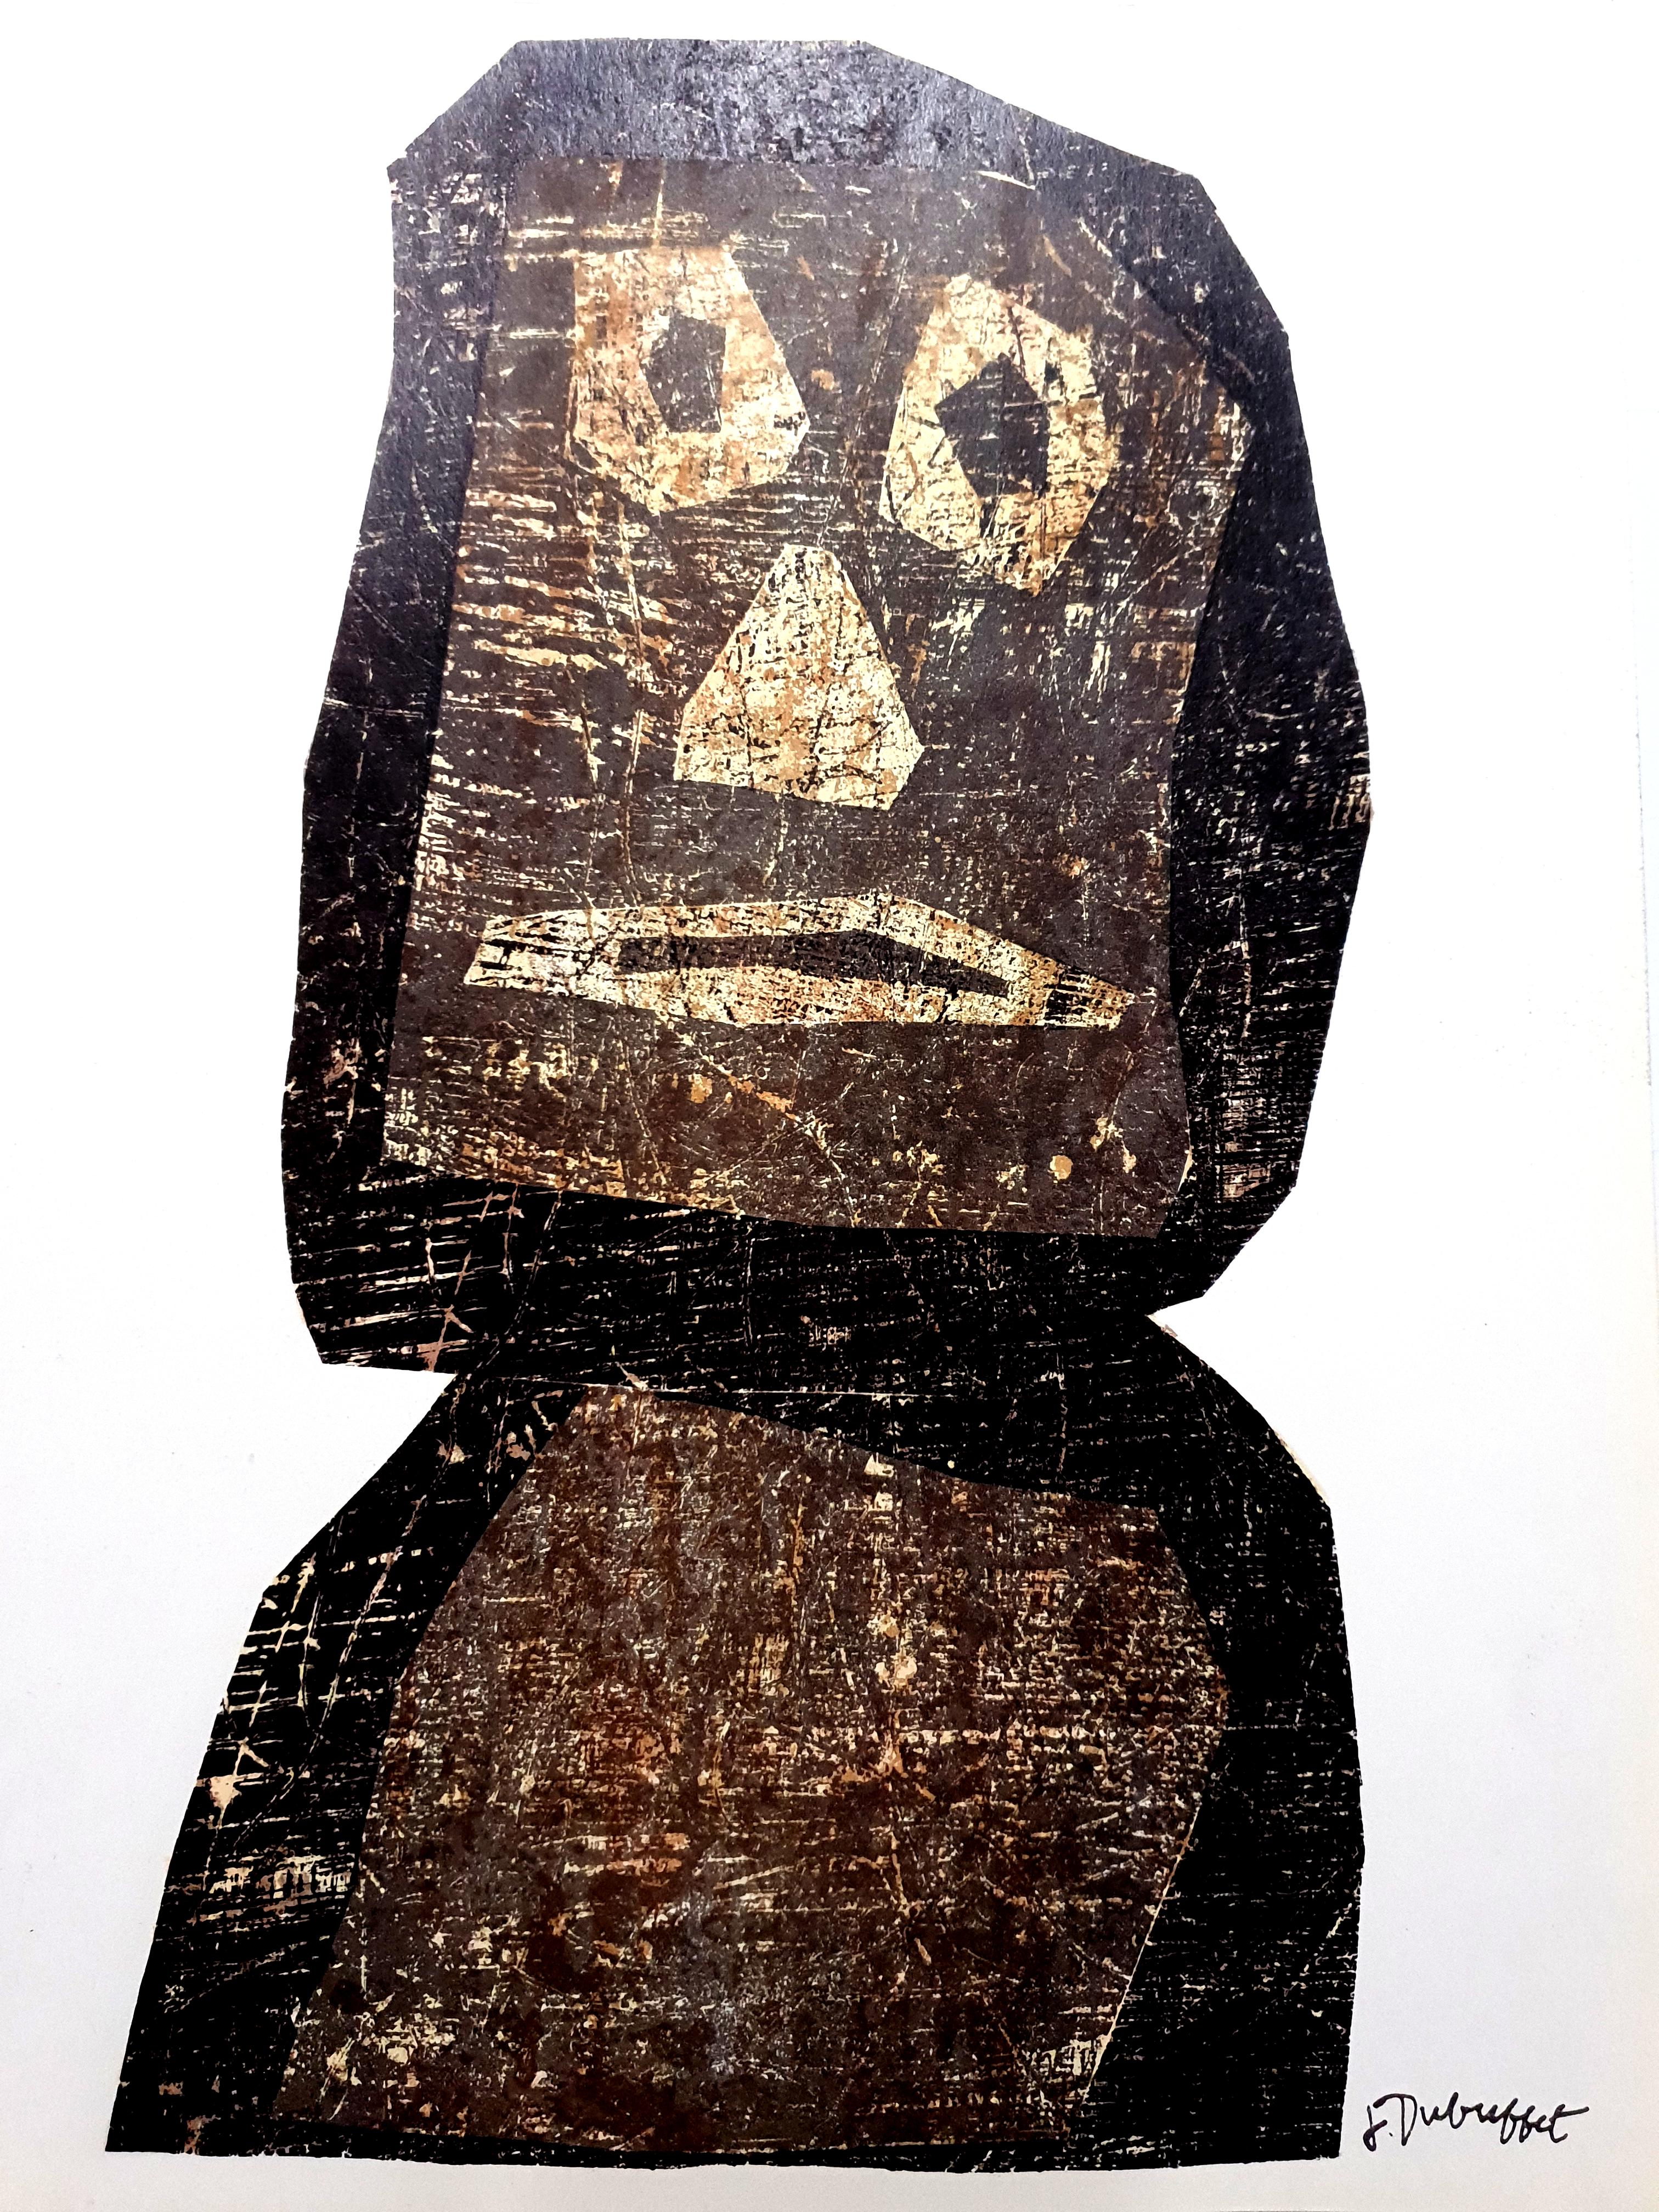 Jean Dubuffet - Original Lithograph from  XXe Siecle magazine
1958
Dimensions: 32 x 25 cm 
Edition: G. di San Lazzaro.
Unsigned and unumbered as issued